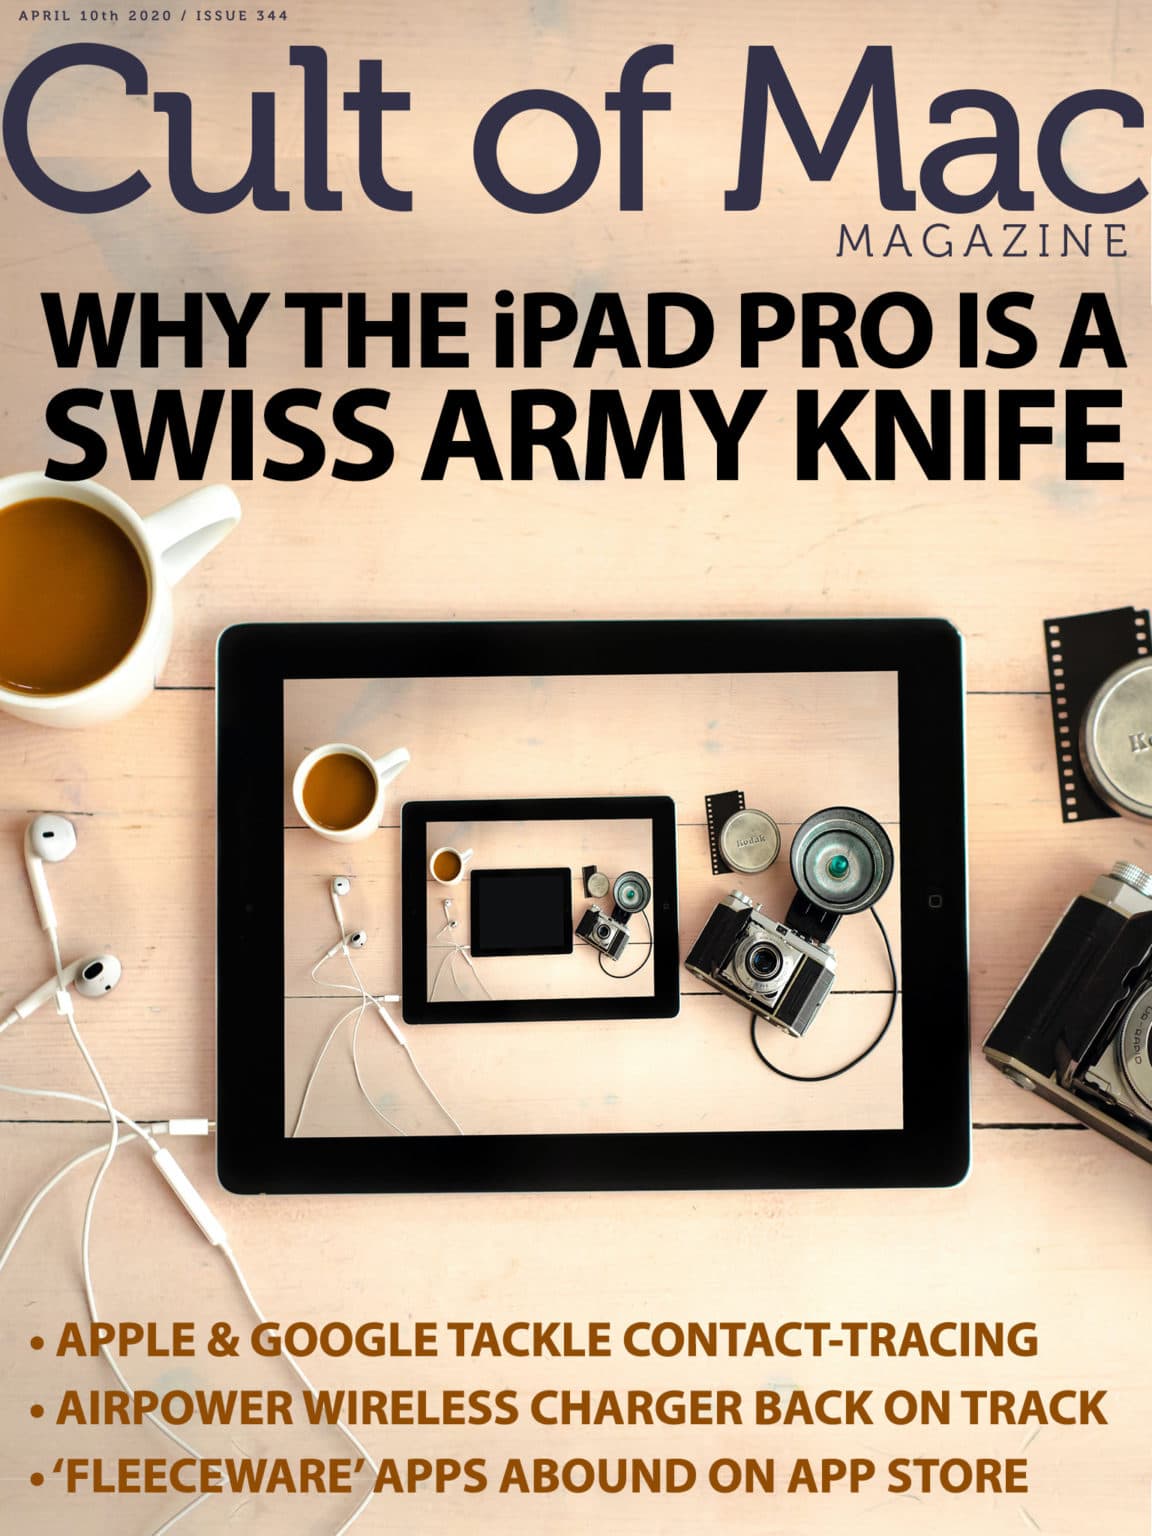 iPad Pro as Swiss Army knife: Just exactly what kind of tool(s) do you need?